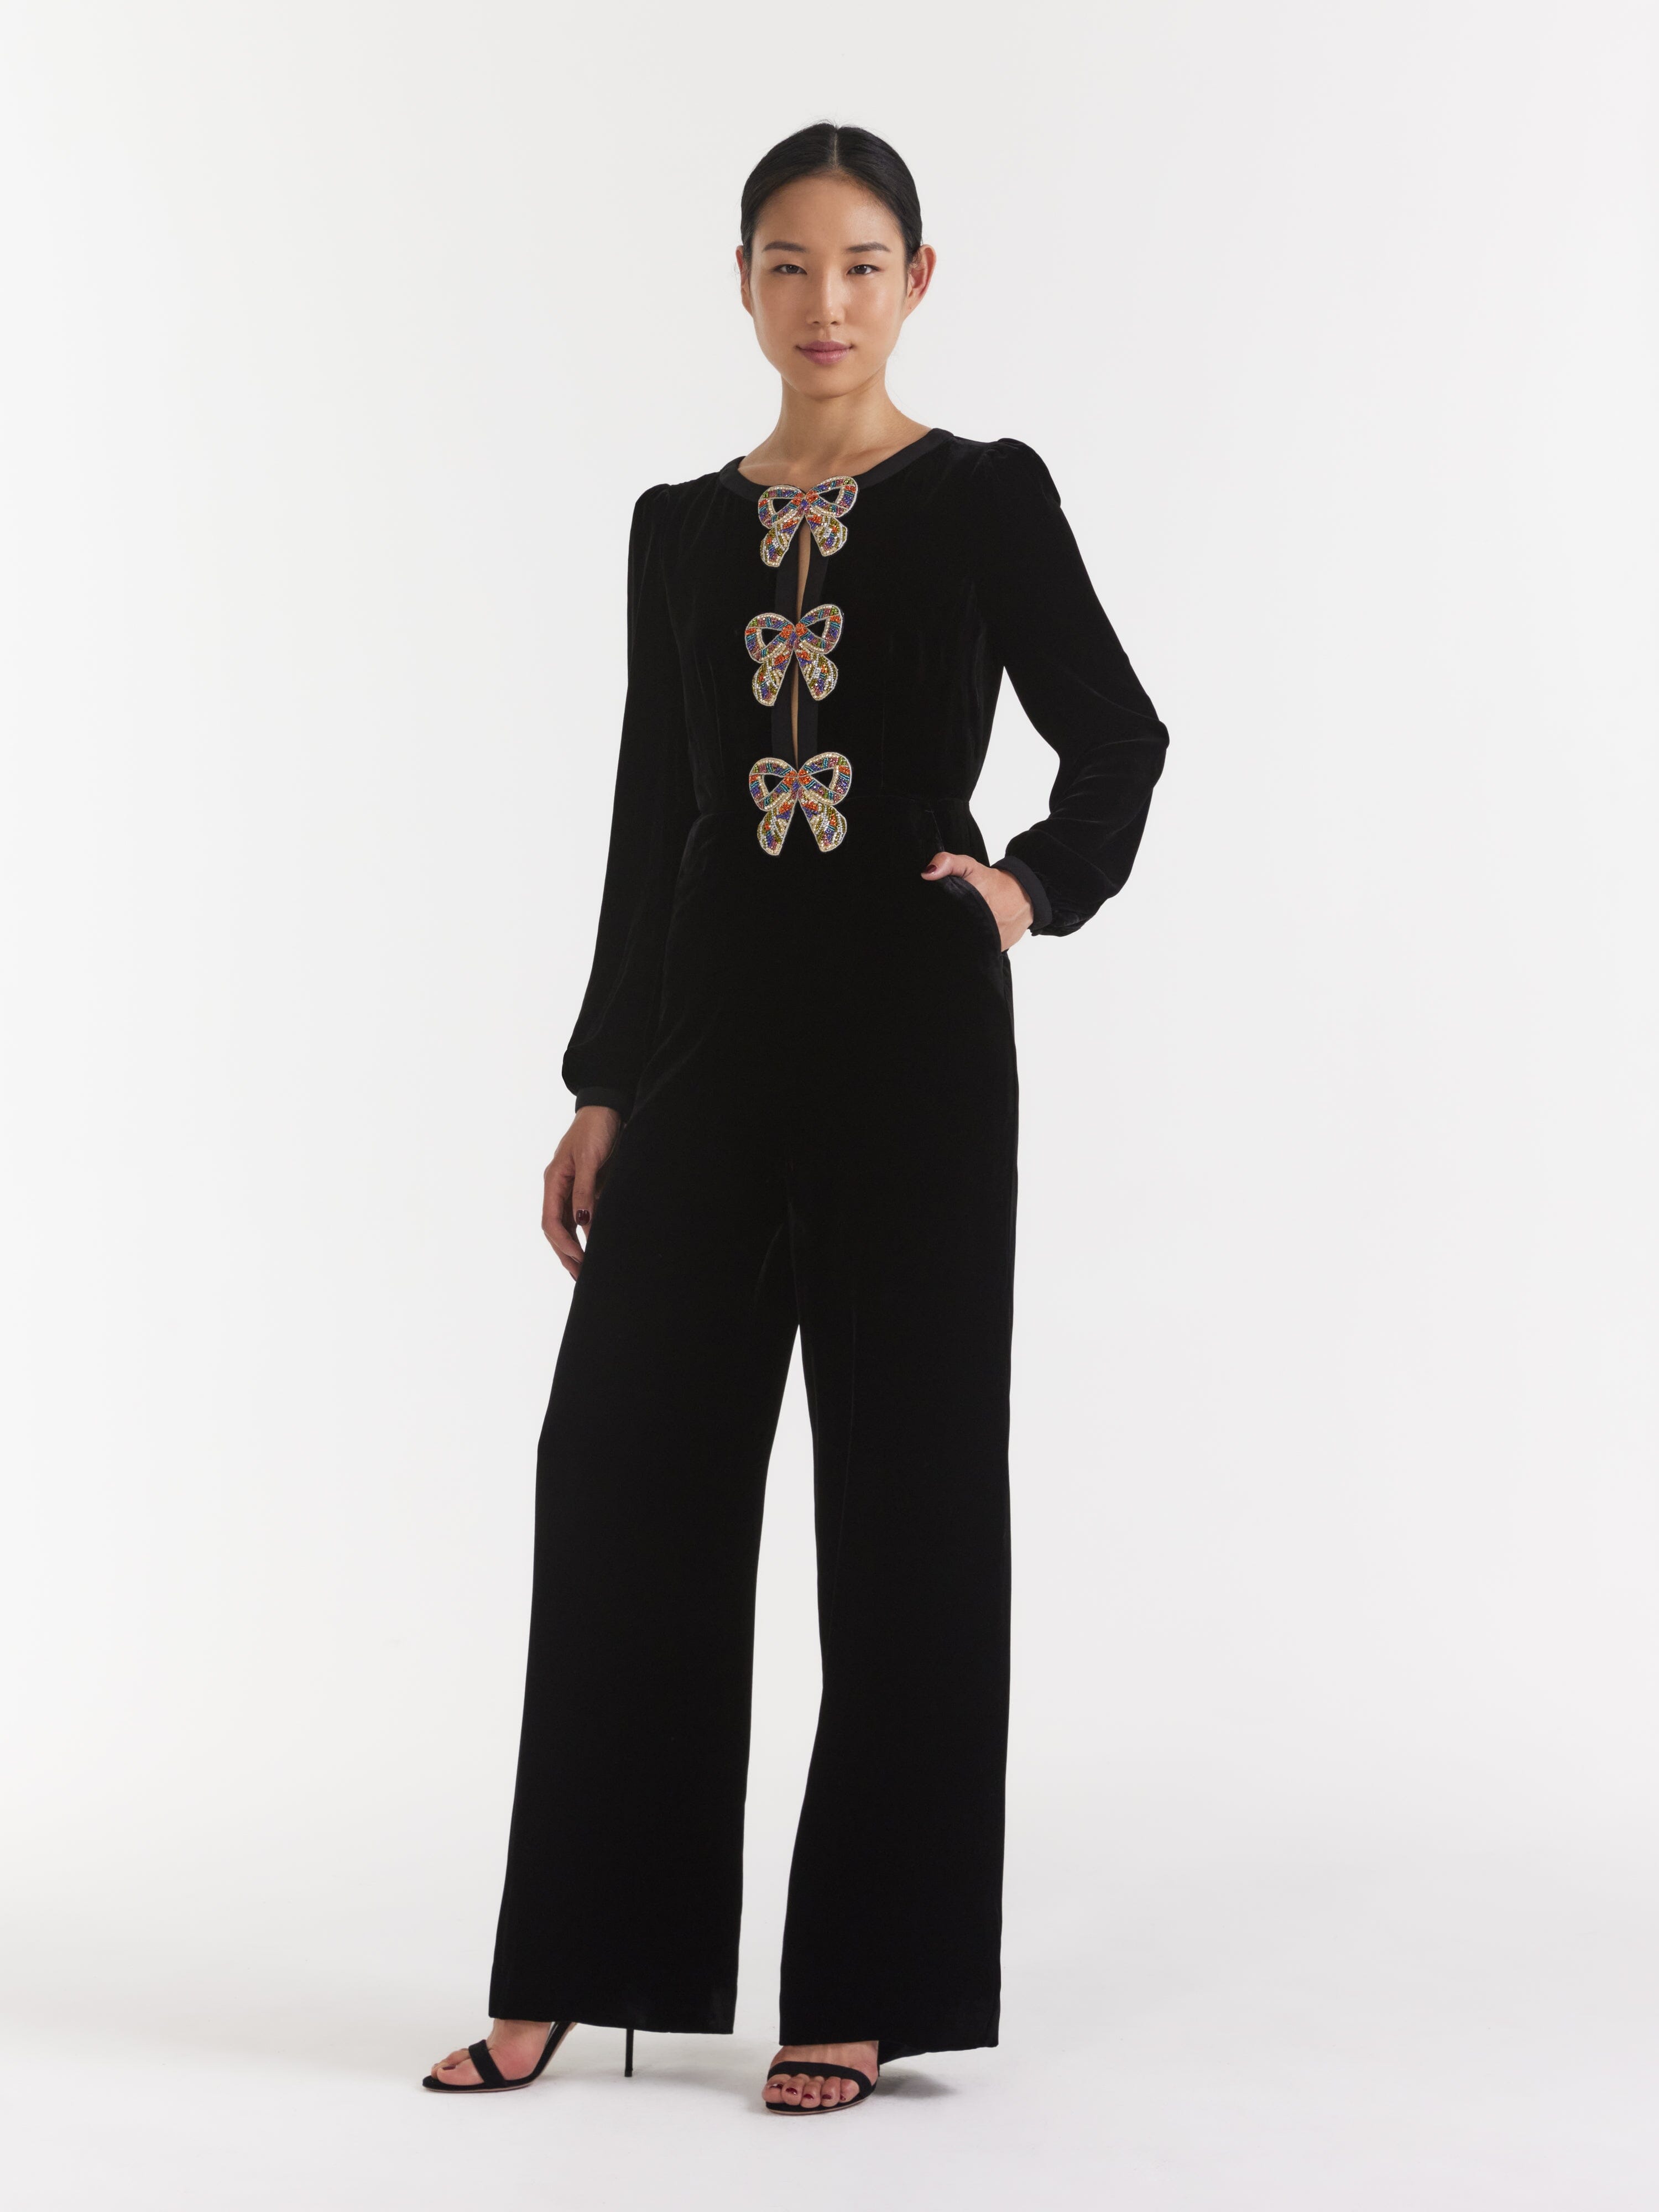 Camille Velvet Embellished Bows Jumpsuit in Black with Rainbow Bows